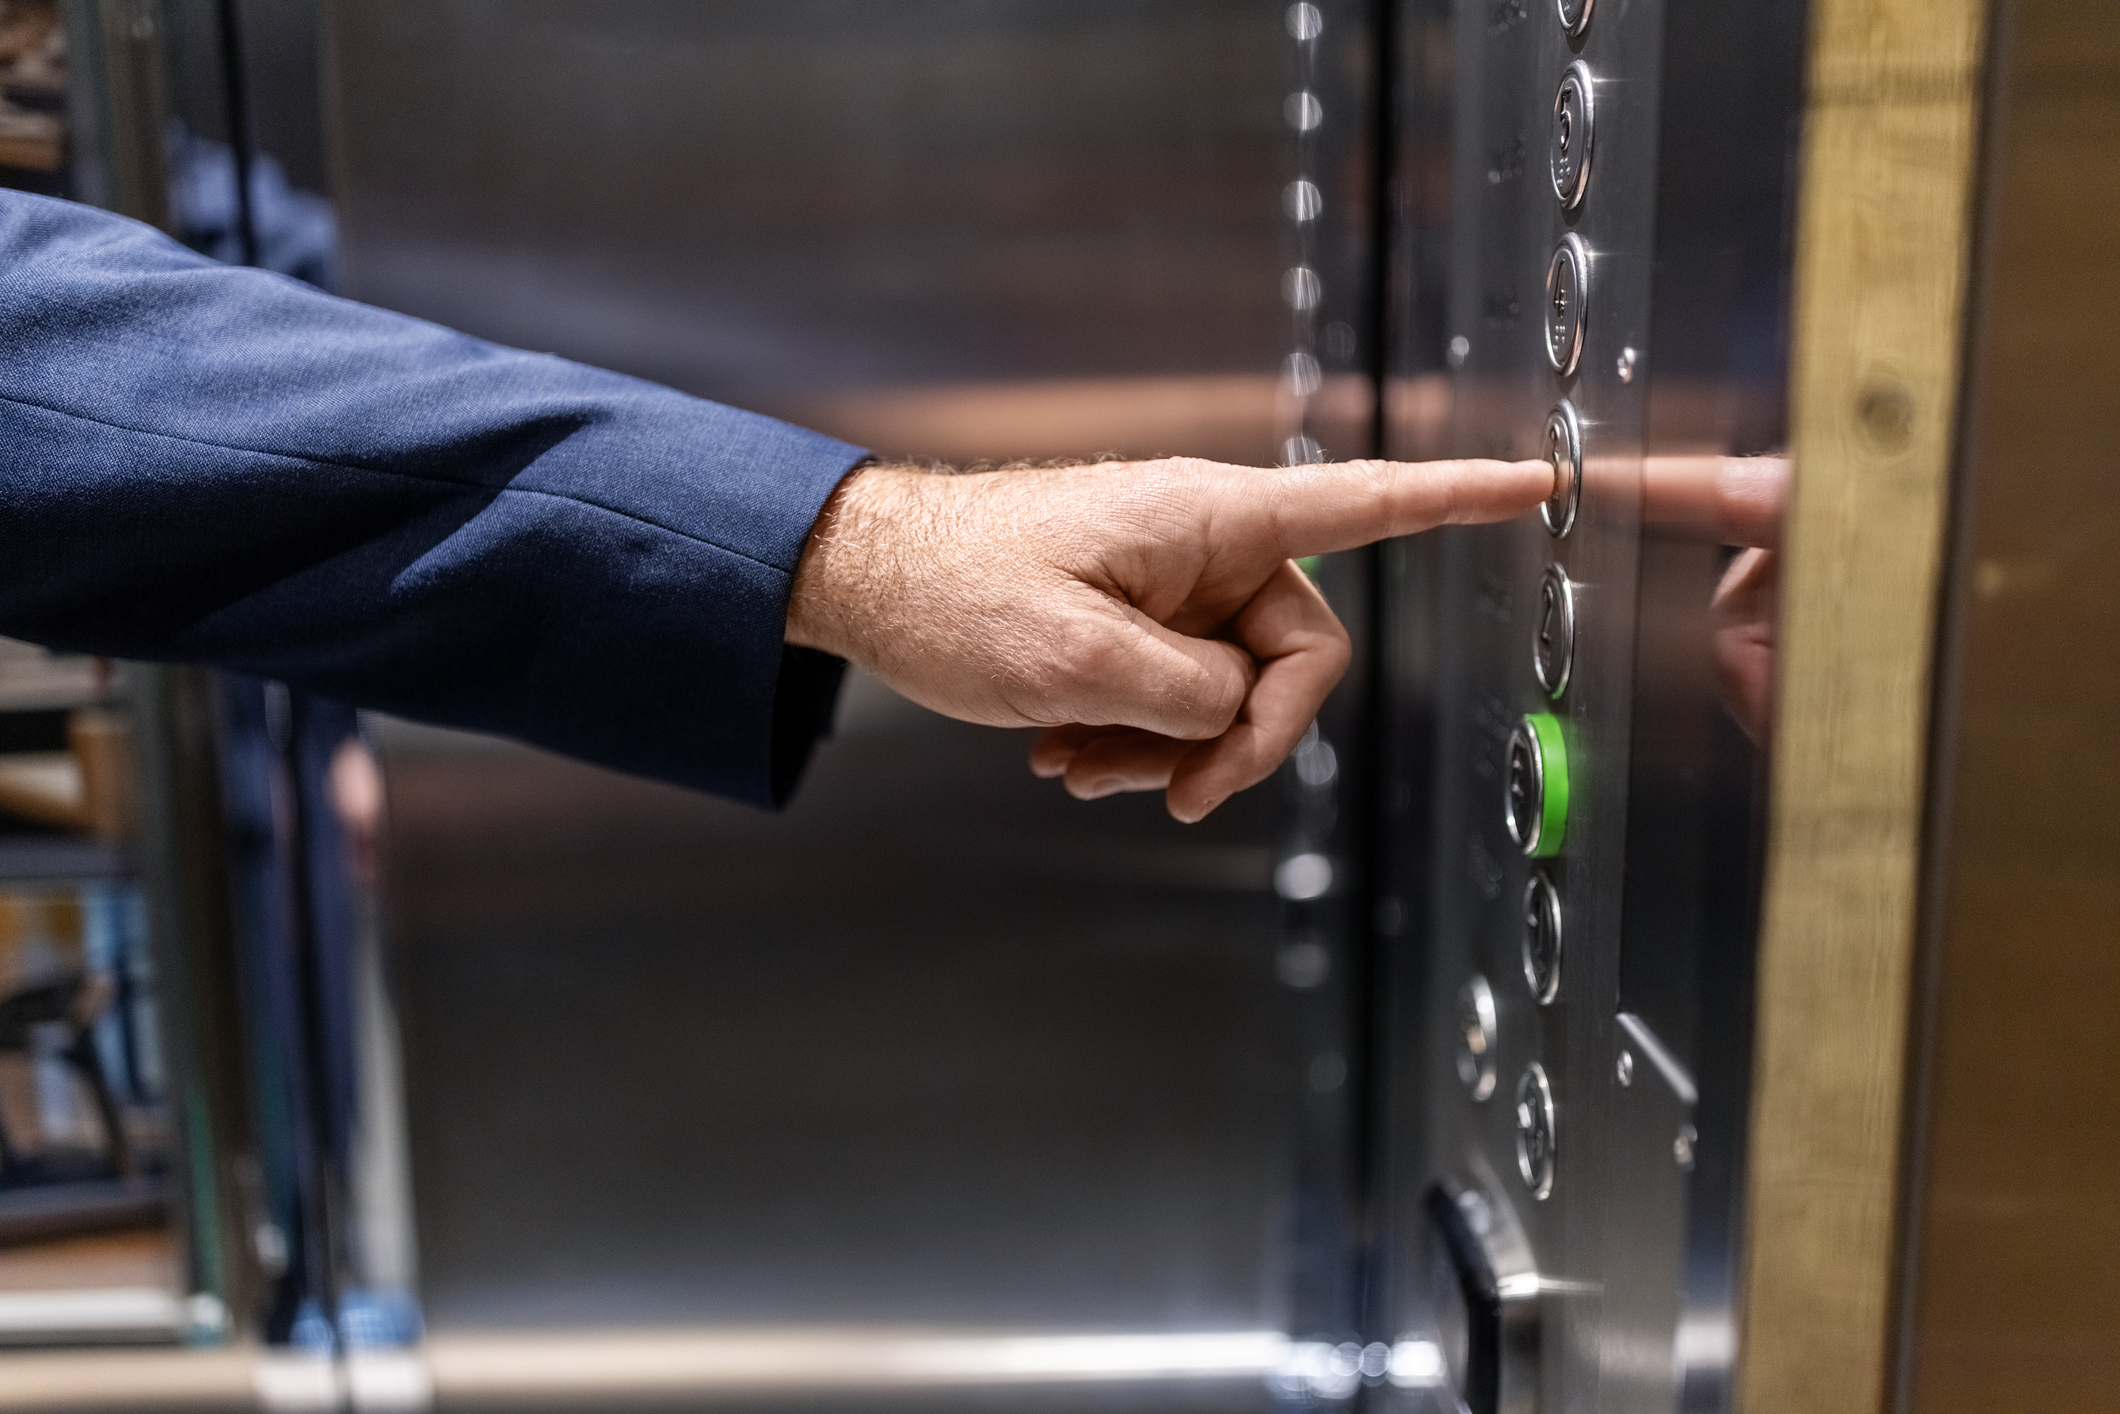 a person pressing a button on an elevator